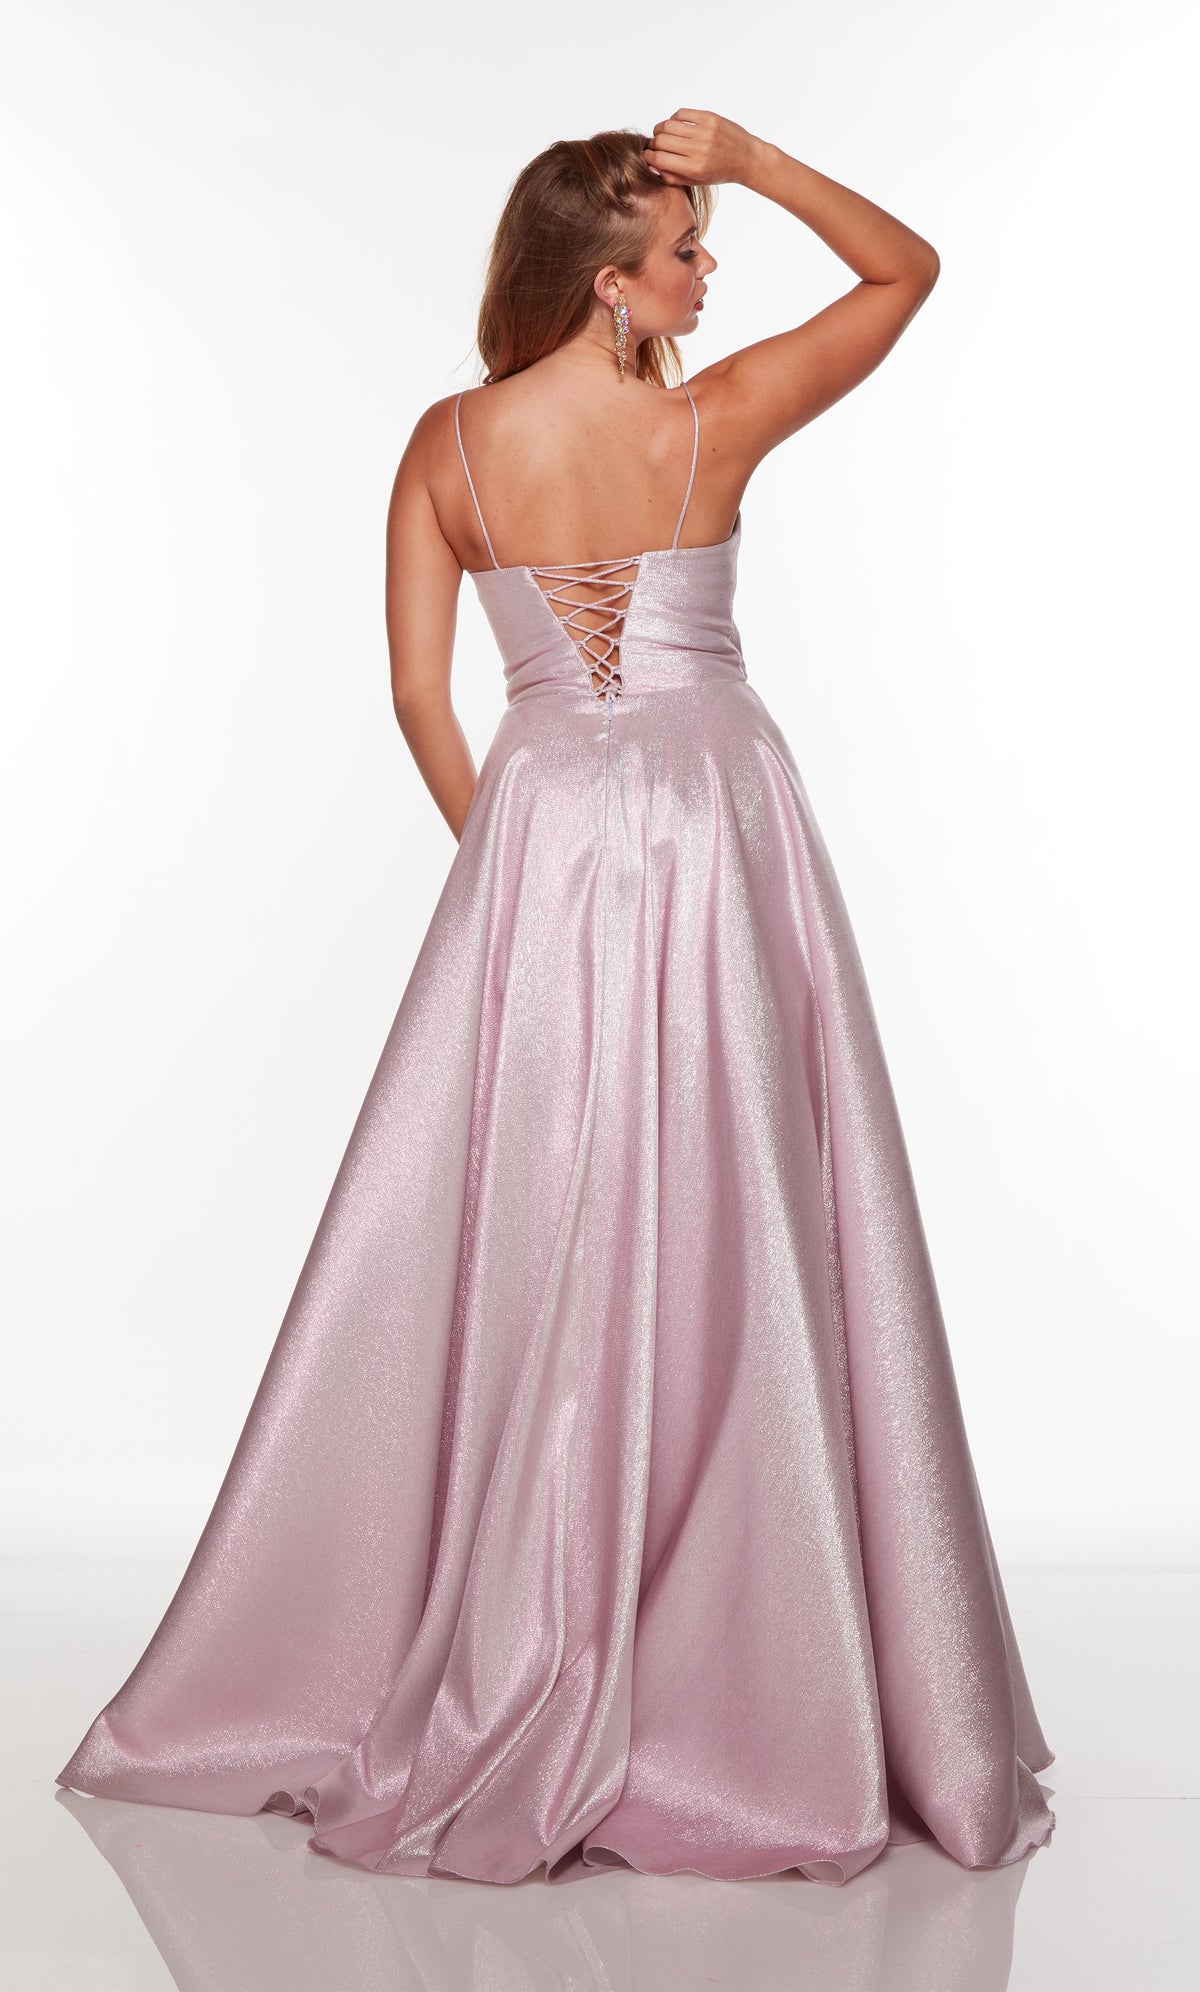 Light purple prom dress with a sweetheart neckline, ruched bodice, and pockets.